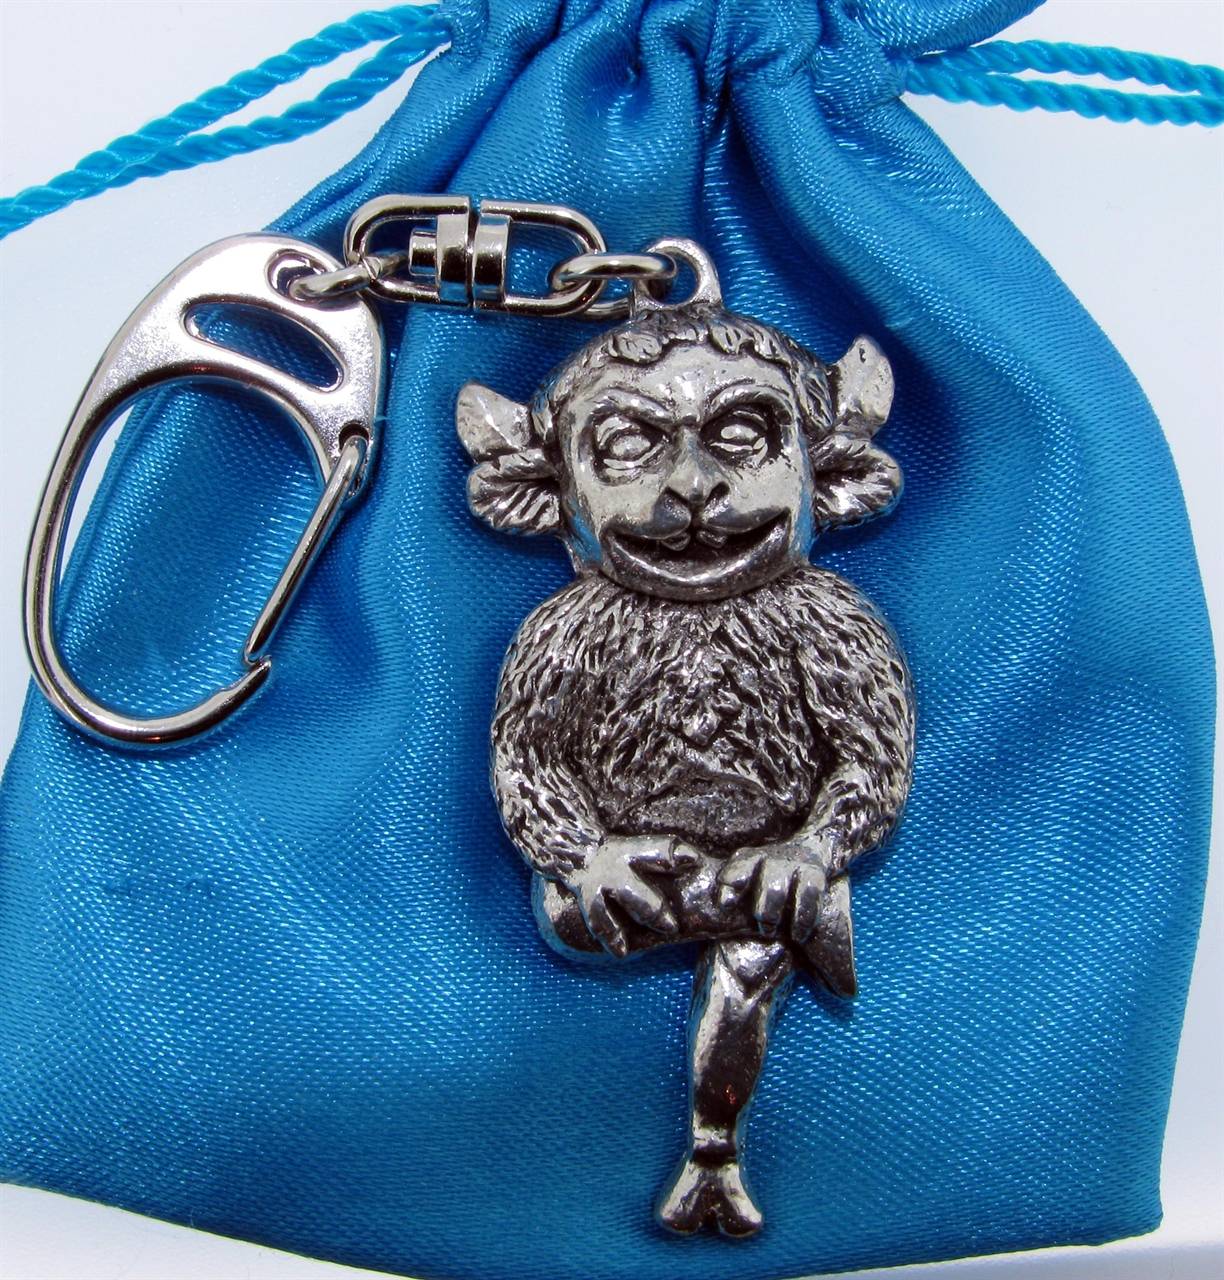 Lincoln Imp Keyring - high quality pewter gifts from Pageant Pewter